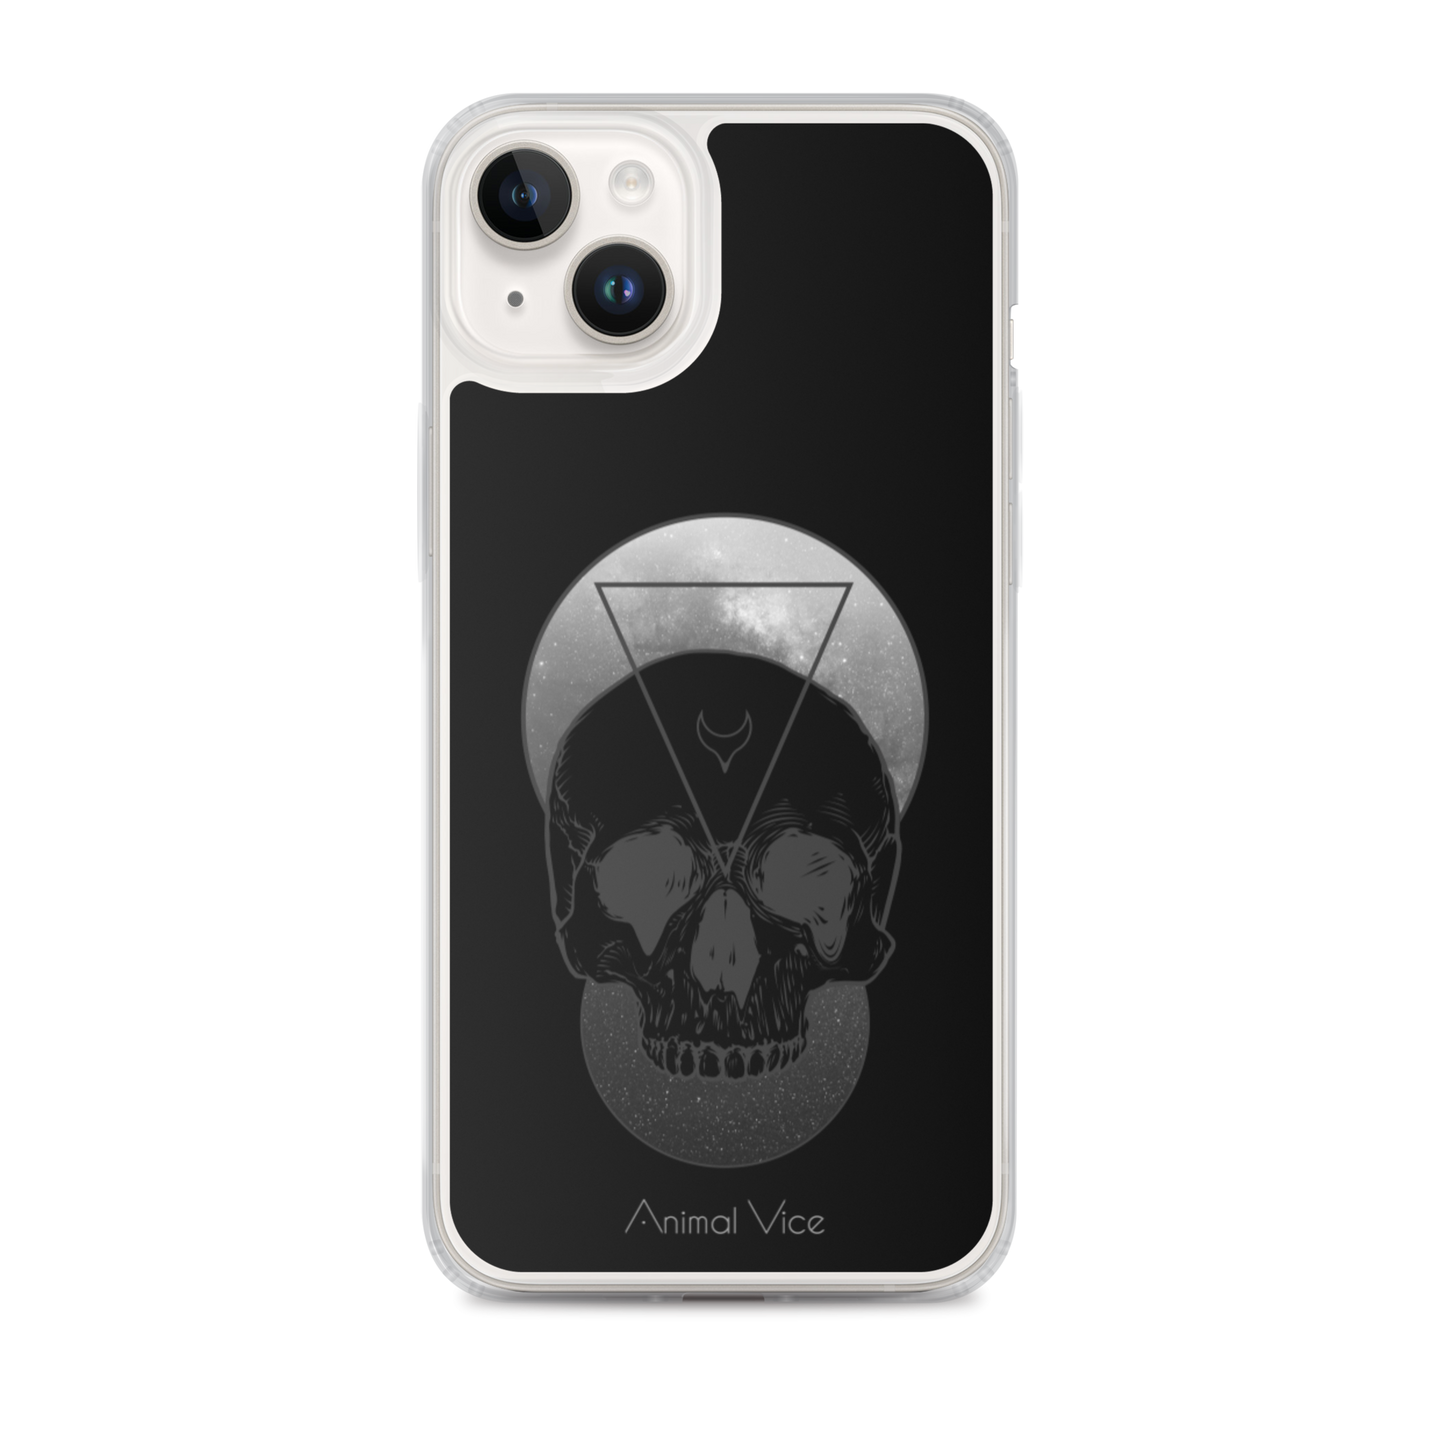 Abyss iPhone Case